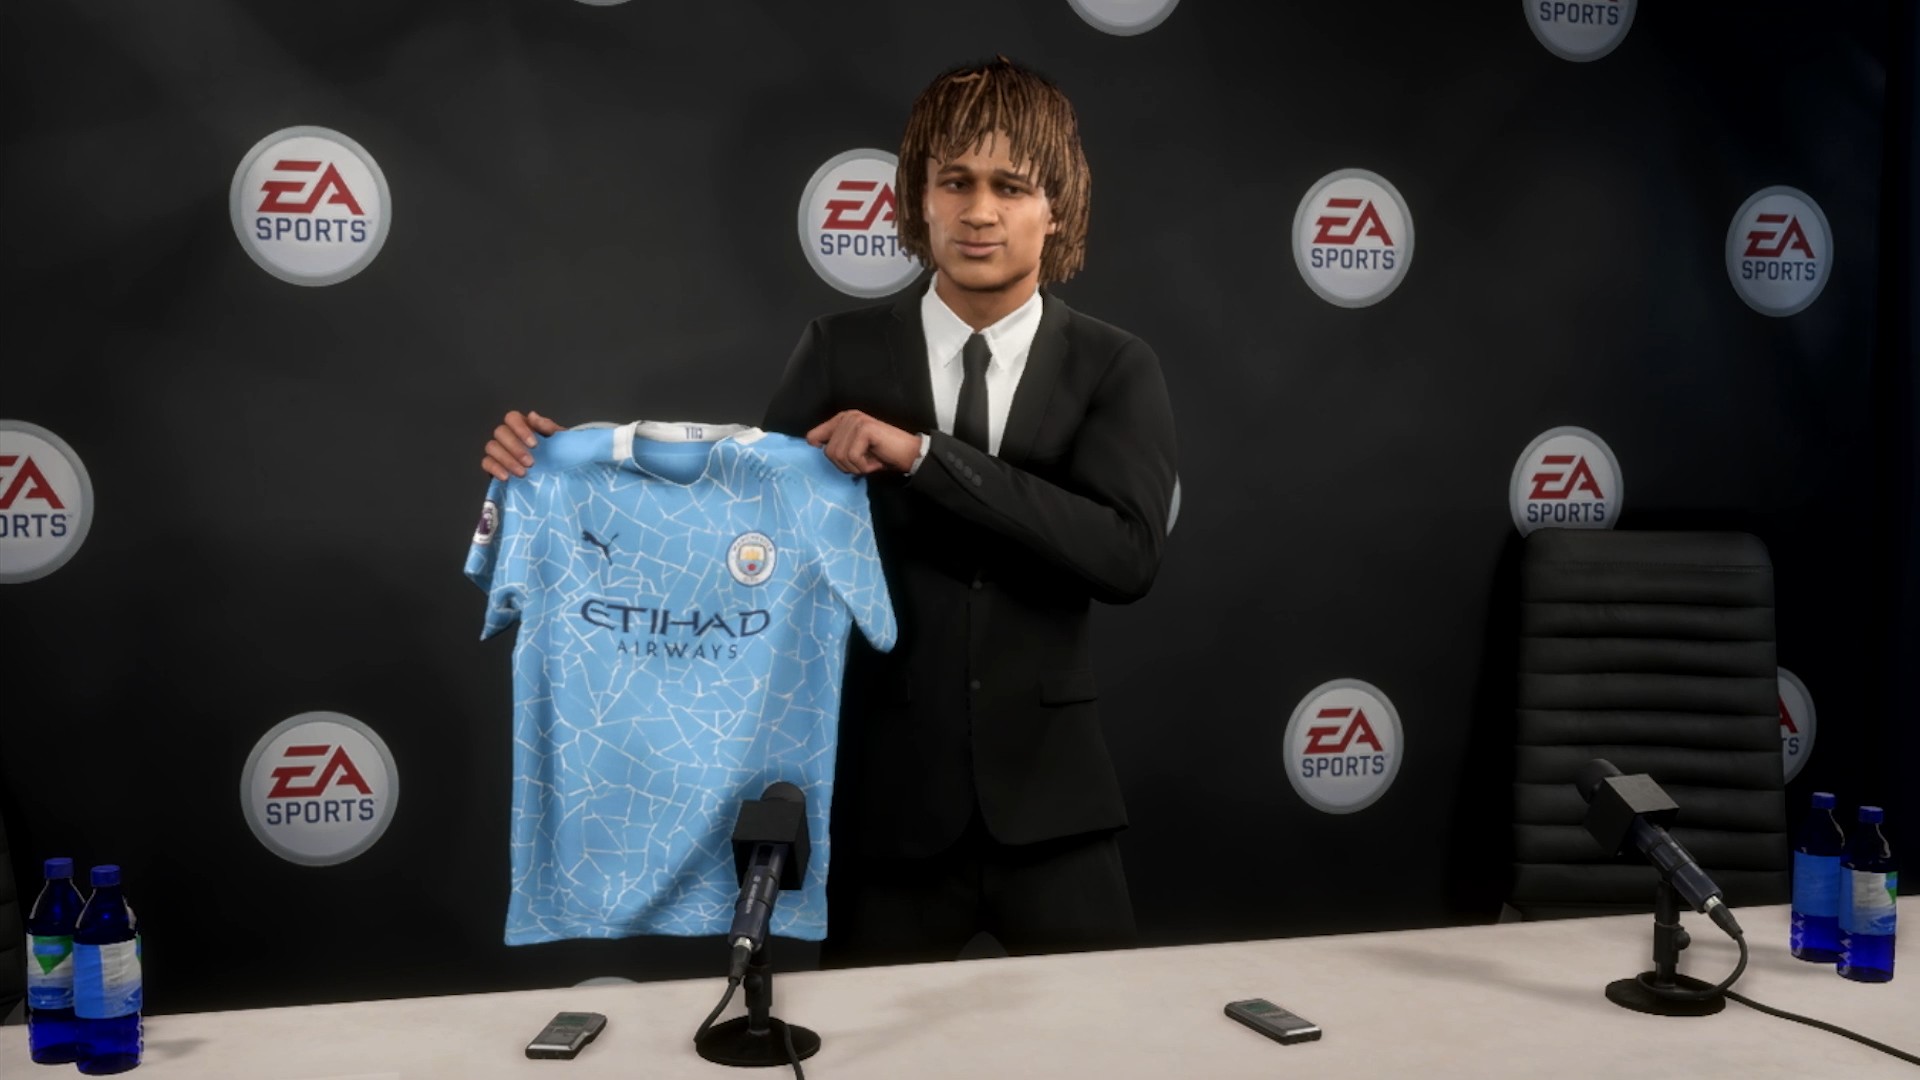 FIFA 21: Live simulation, transfers ... New features in Career mode